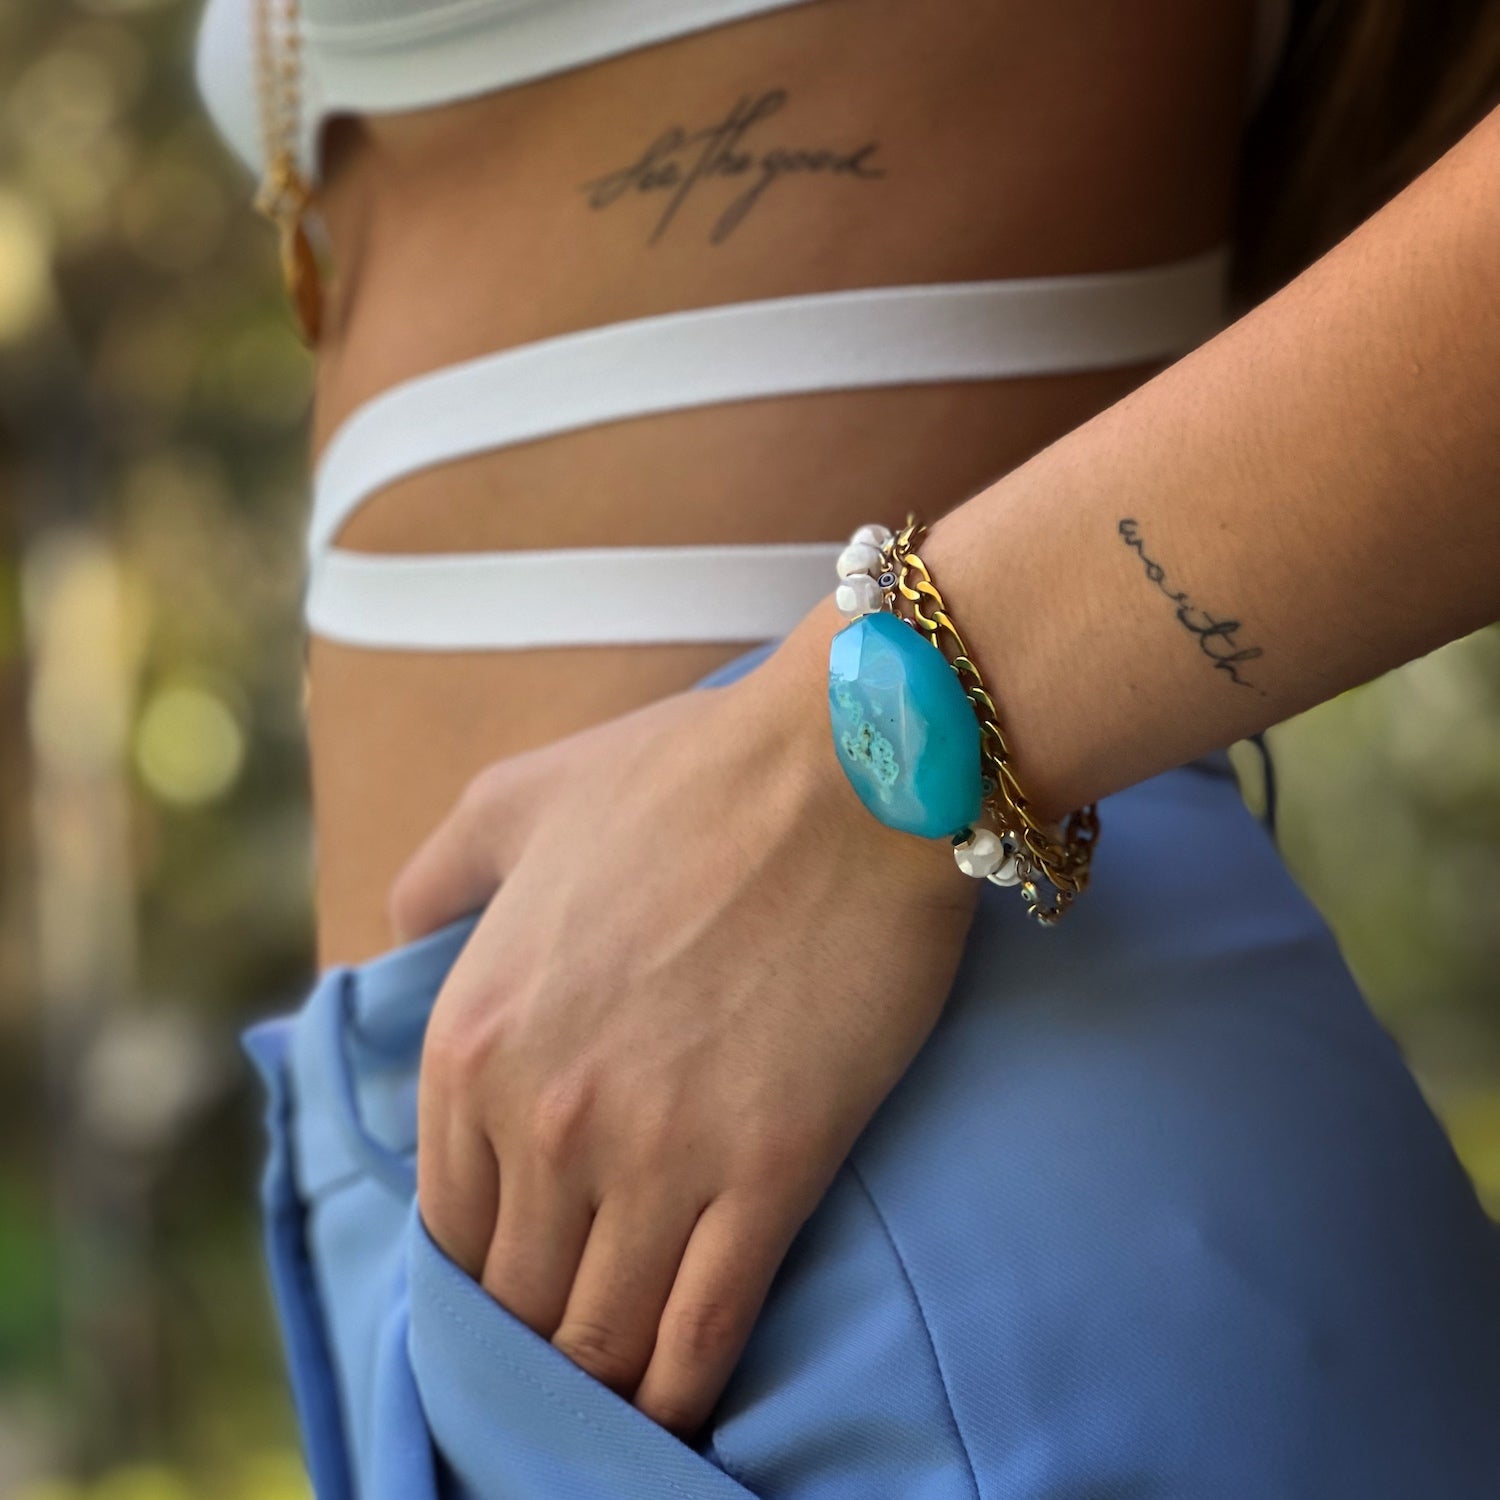 With the Nepal Blue Agate Bracelet adorning the hand model&#39;s wrist, its unique design and craftsmanship are on full display.